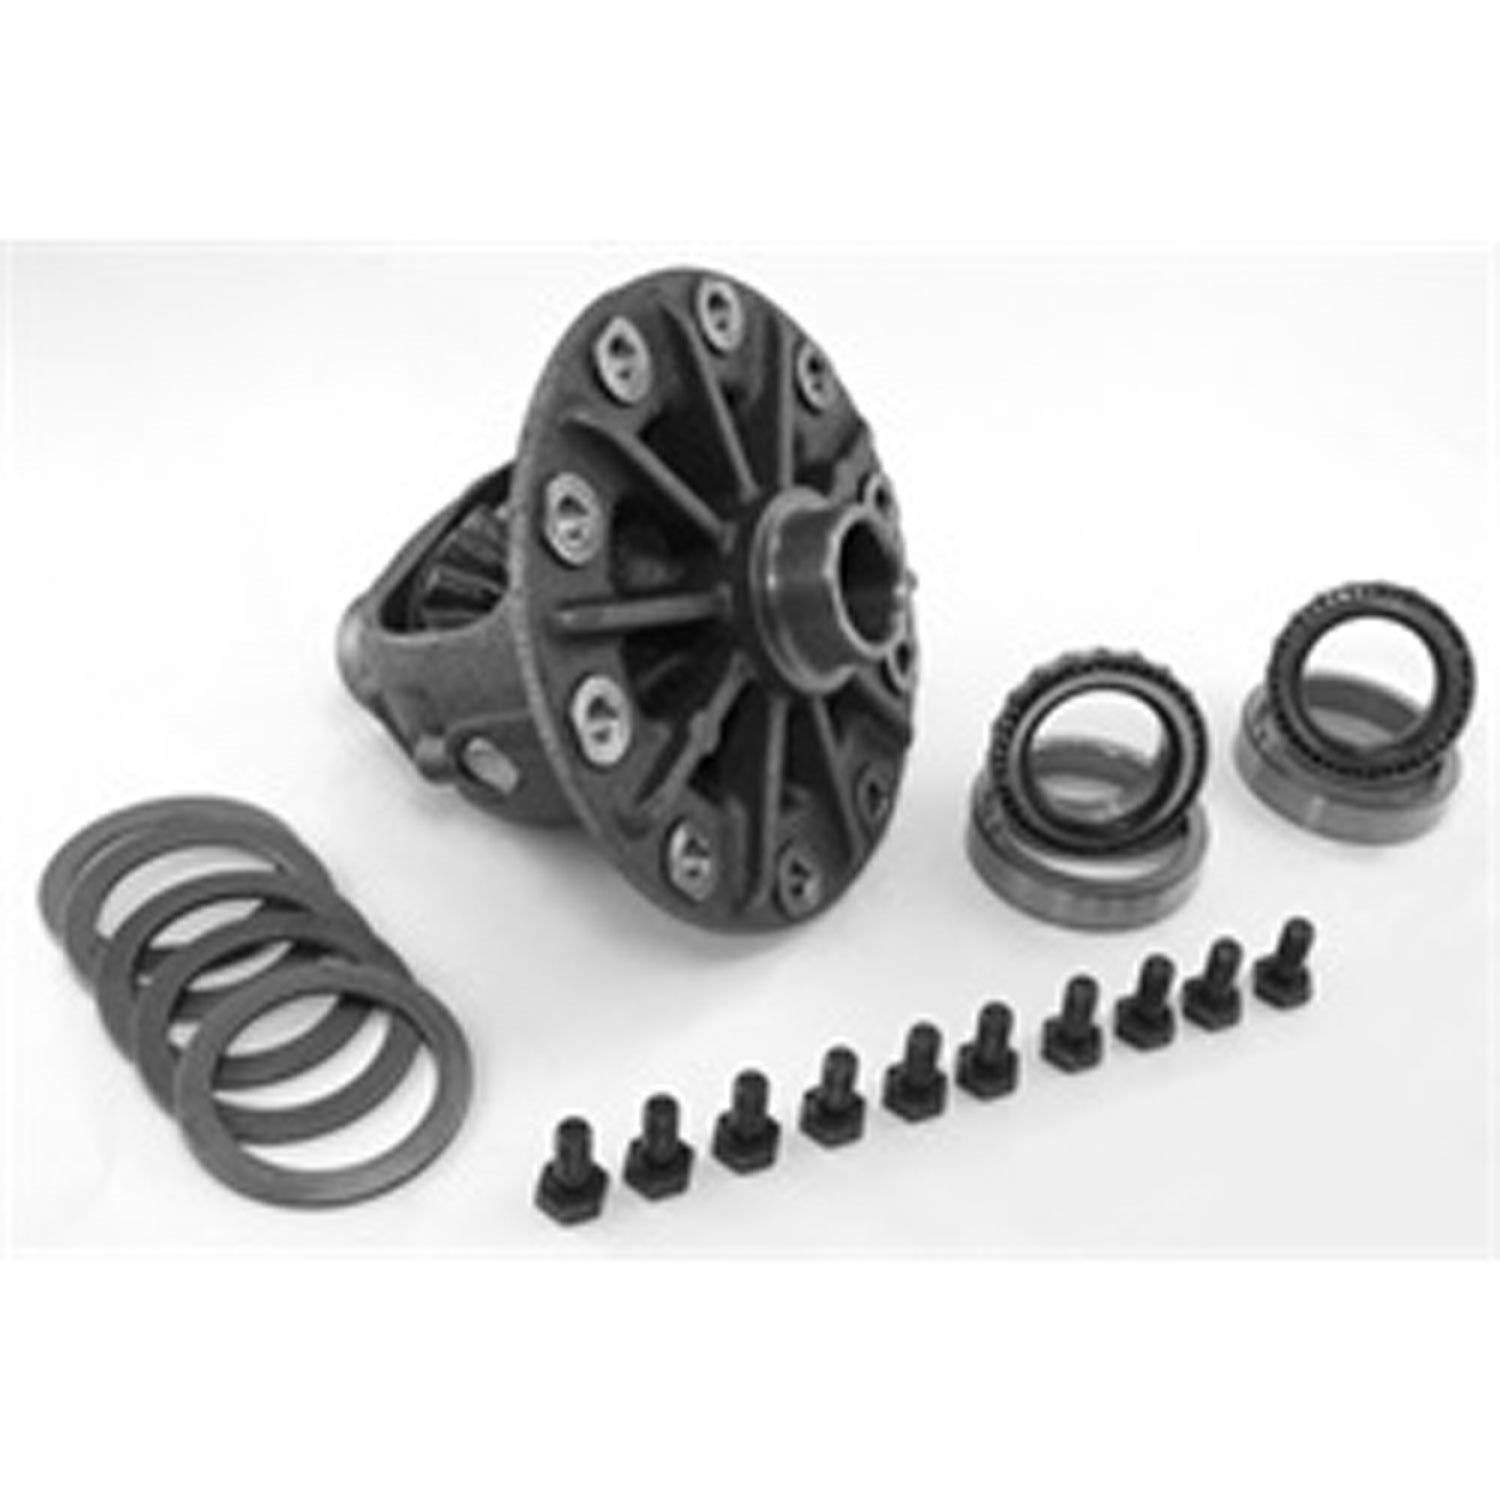 Standard differential case assembly for Dana Super 30 3.55 ratio 99-04 Jeep Grand Cherokee WJ